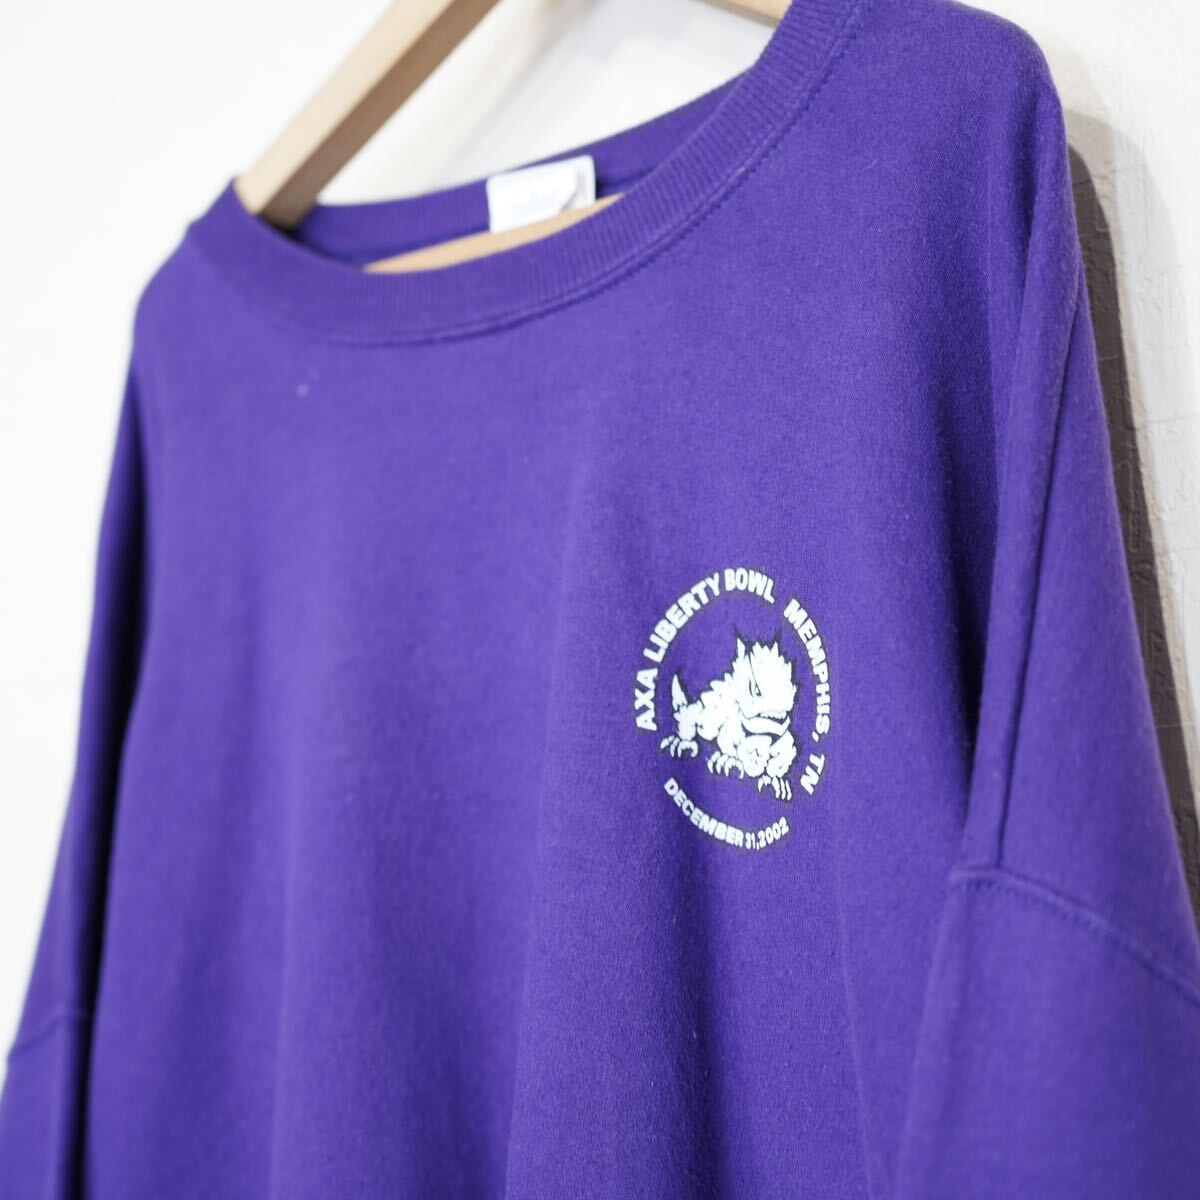 USA VINTAGE JERZEES COLLEGE PRINT DESIGN SWEAT SHIRT/アメリカ古着カレッジプリントデザインスウェット 